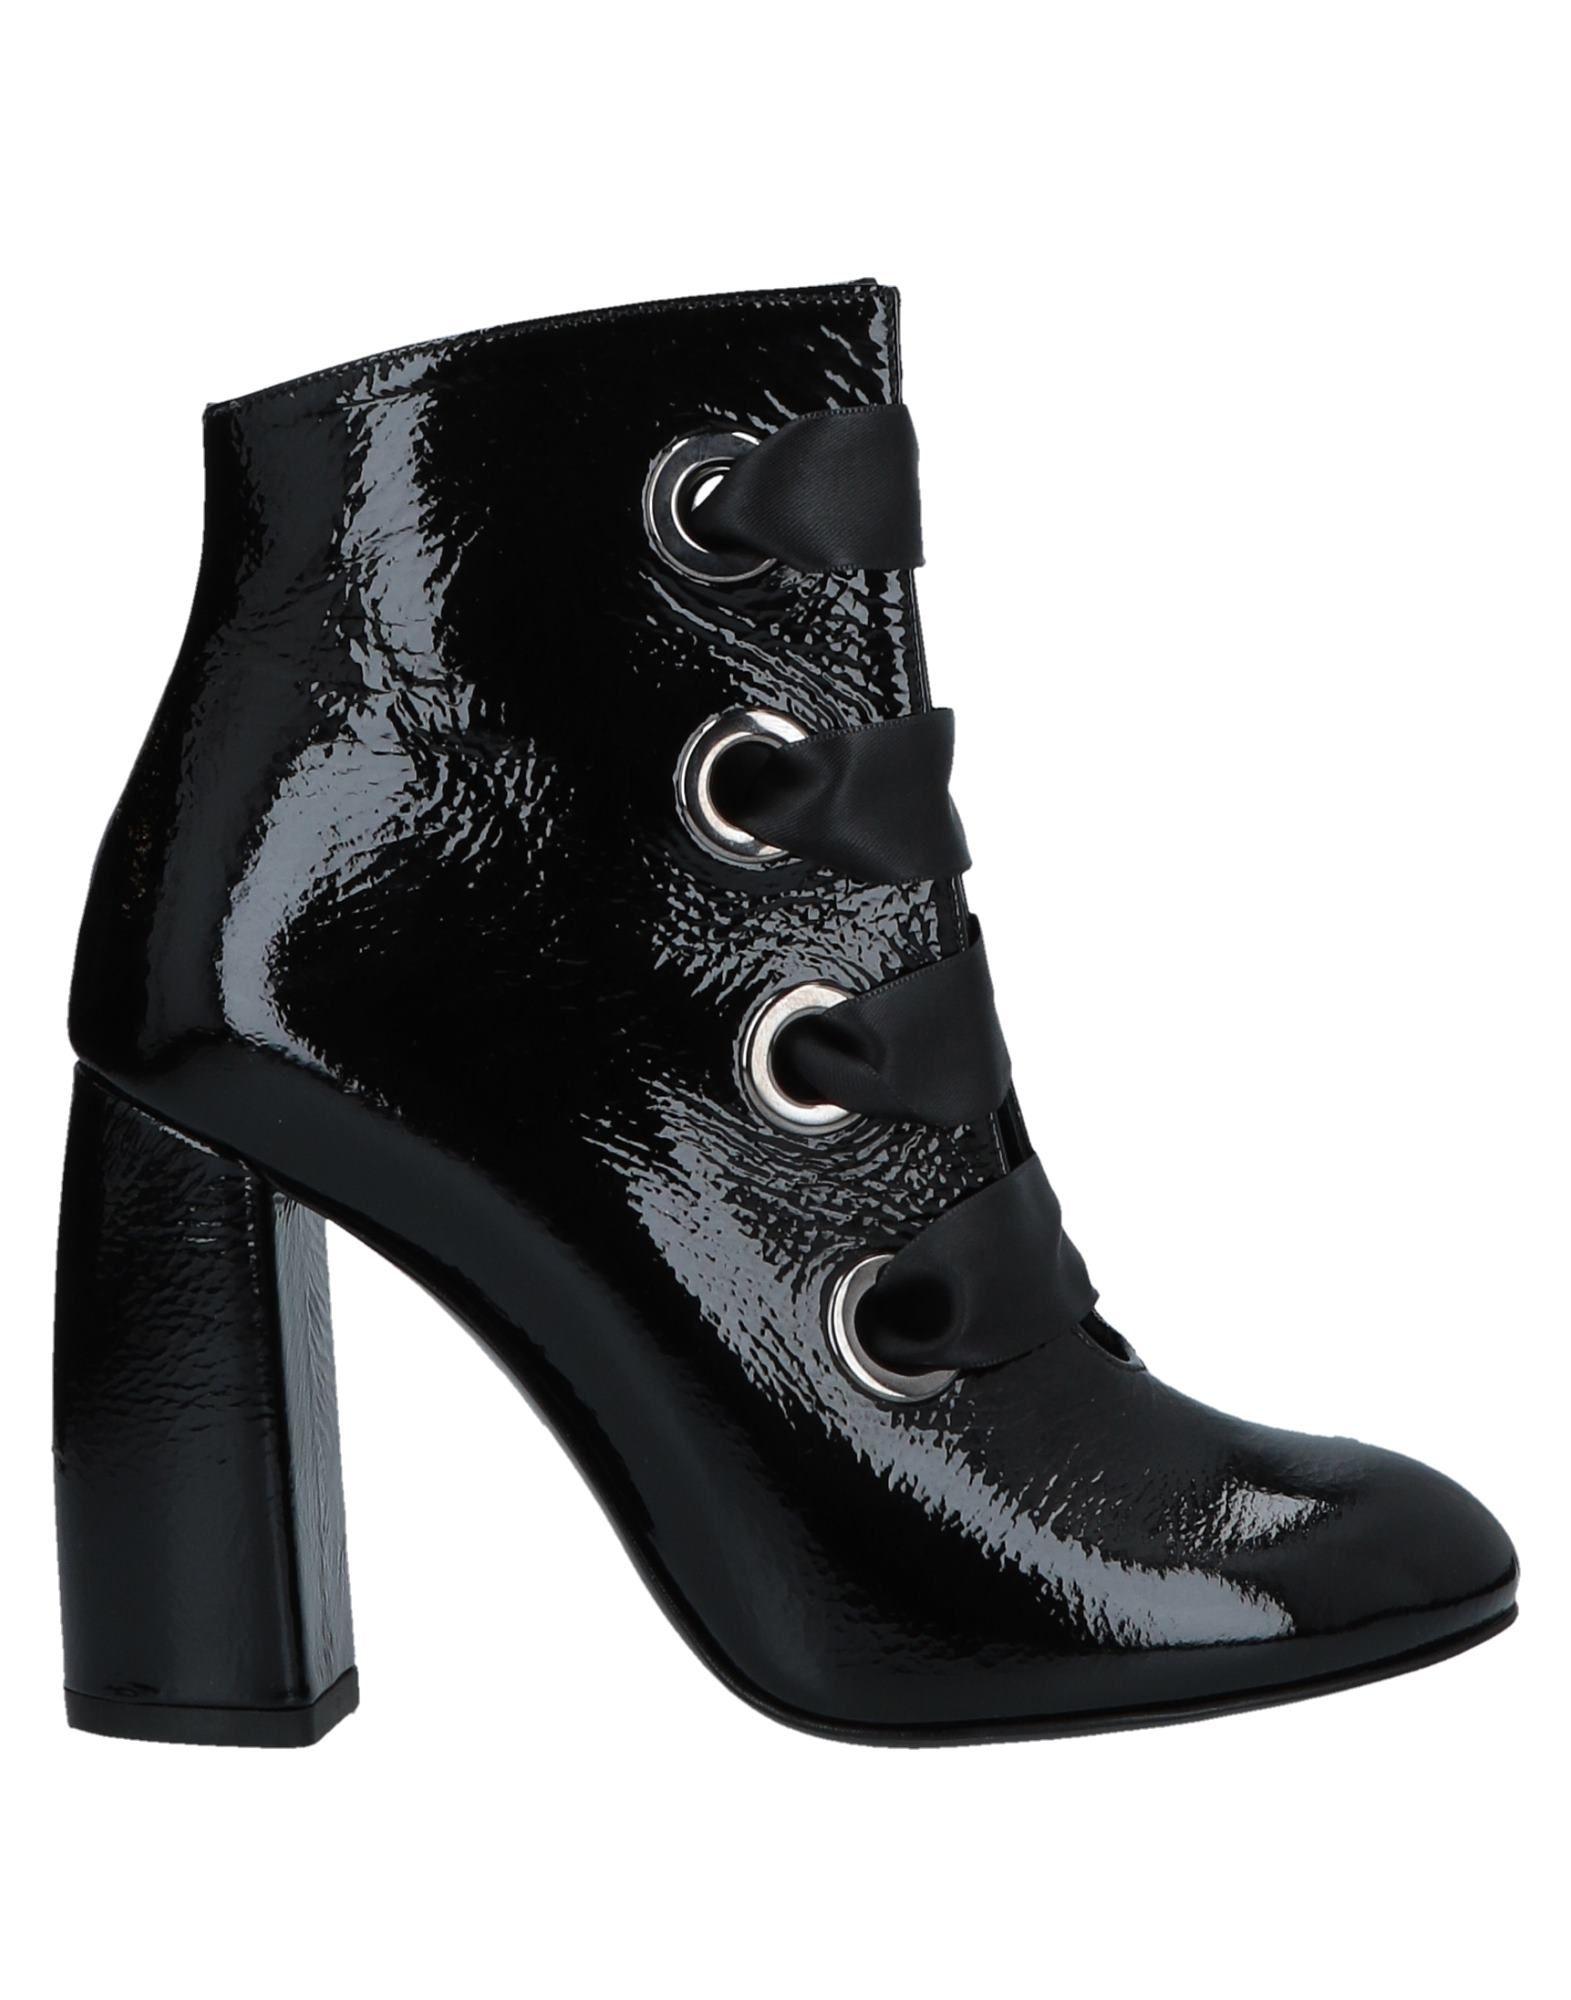 Noa Leather Ankle Boots in Black - Lyst